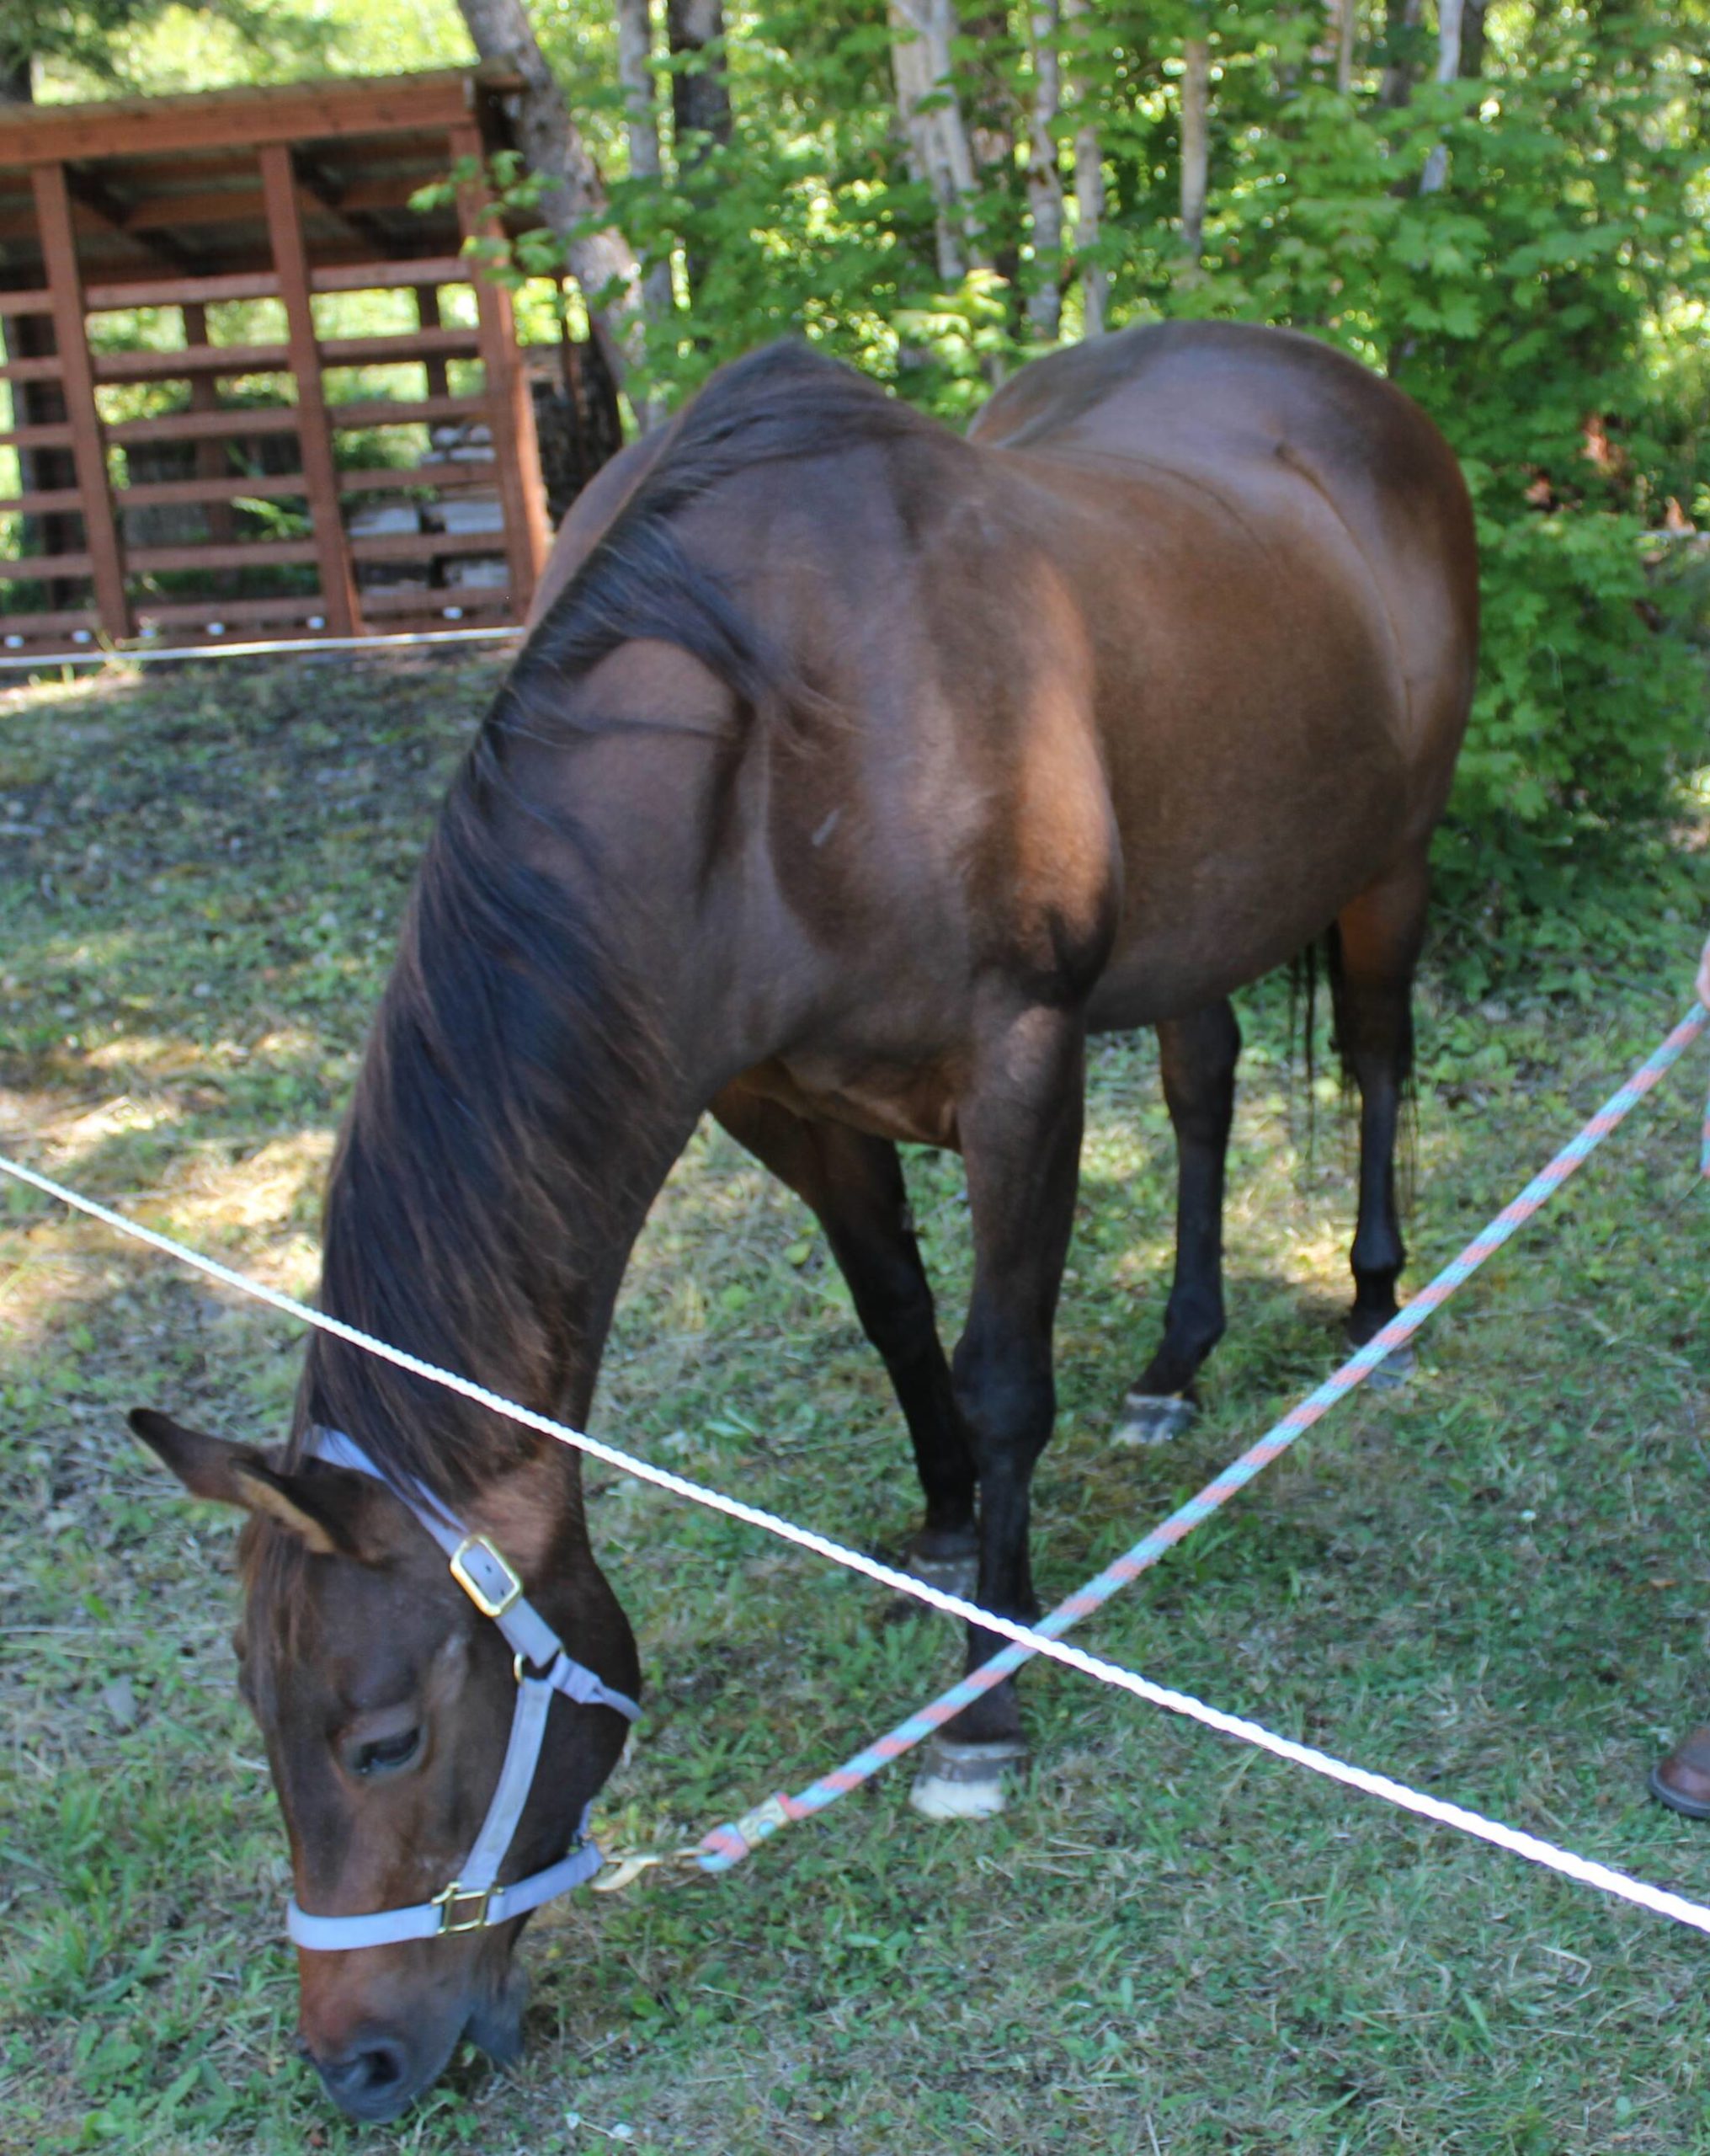 Twenty-nine-year-old Ruby the horse was hanging out in the shade ready to get some pets.